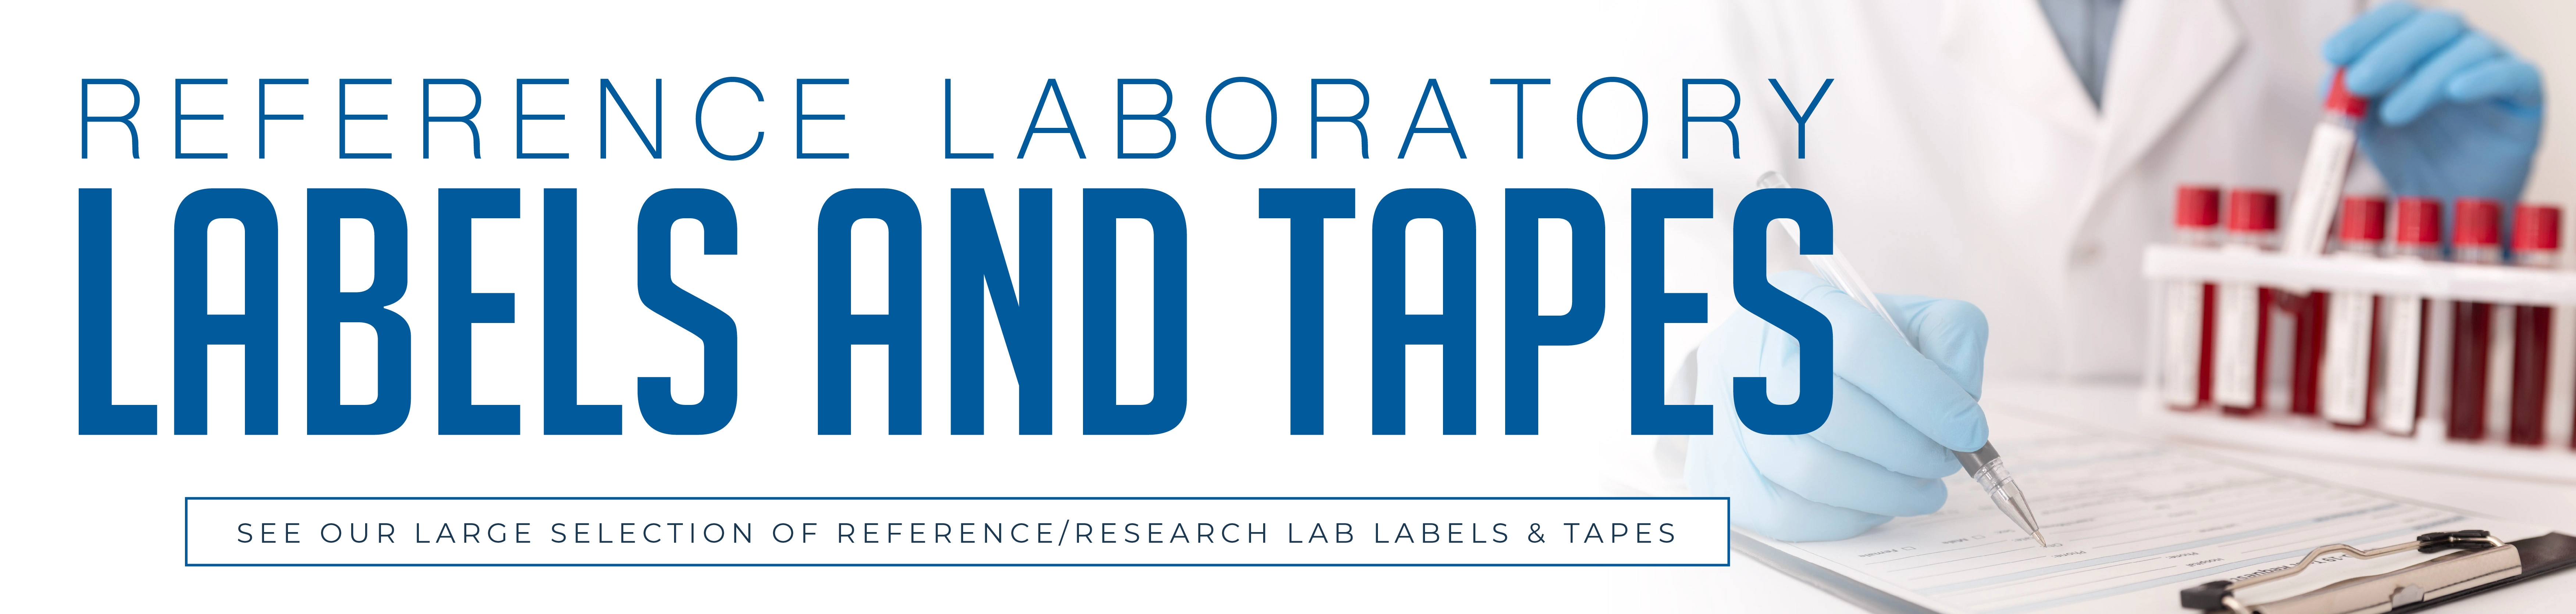 Reference Laboratory Labels and Tape